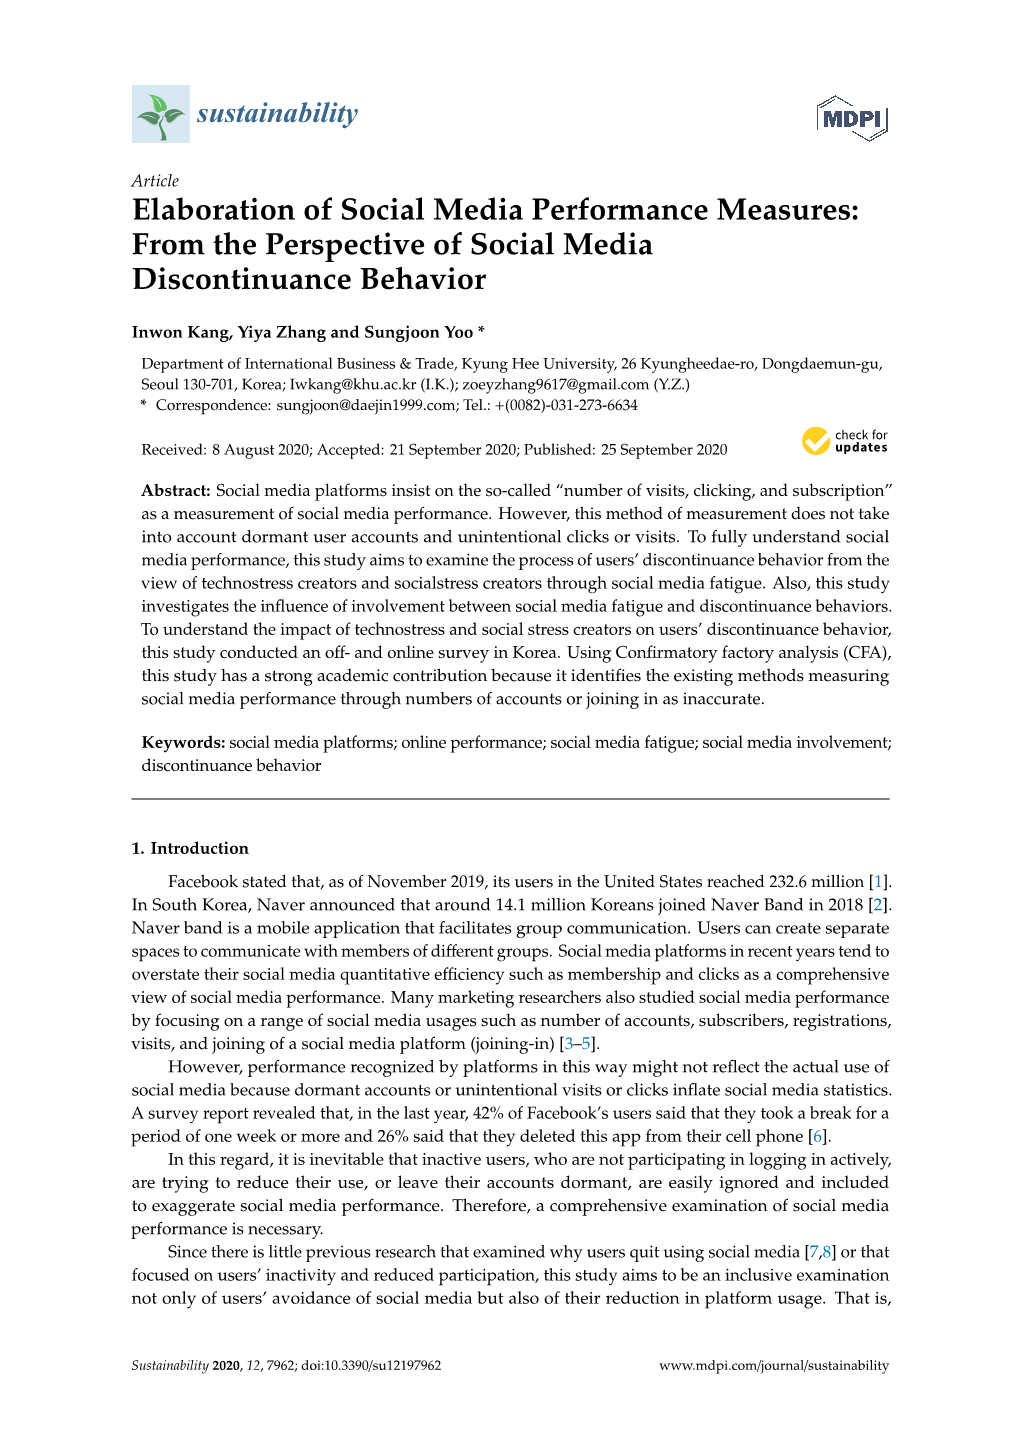 From the Perspective of Social Media Discontinuance Behavior